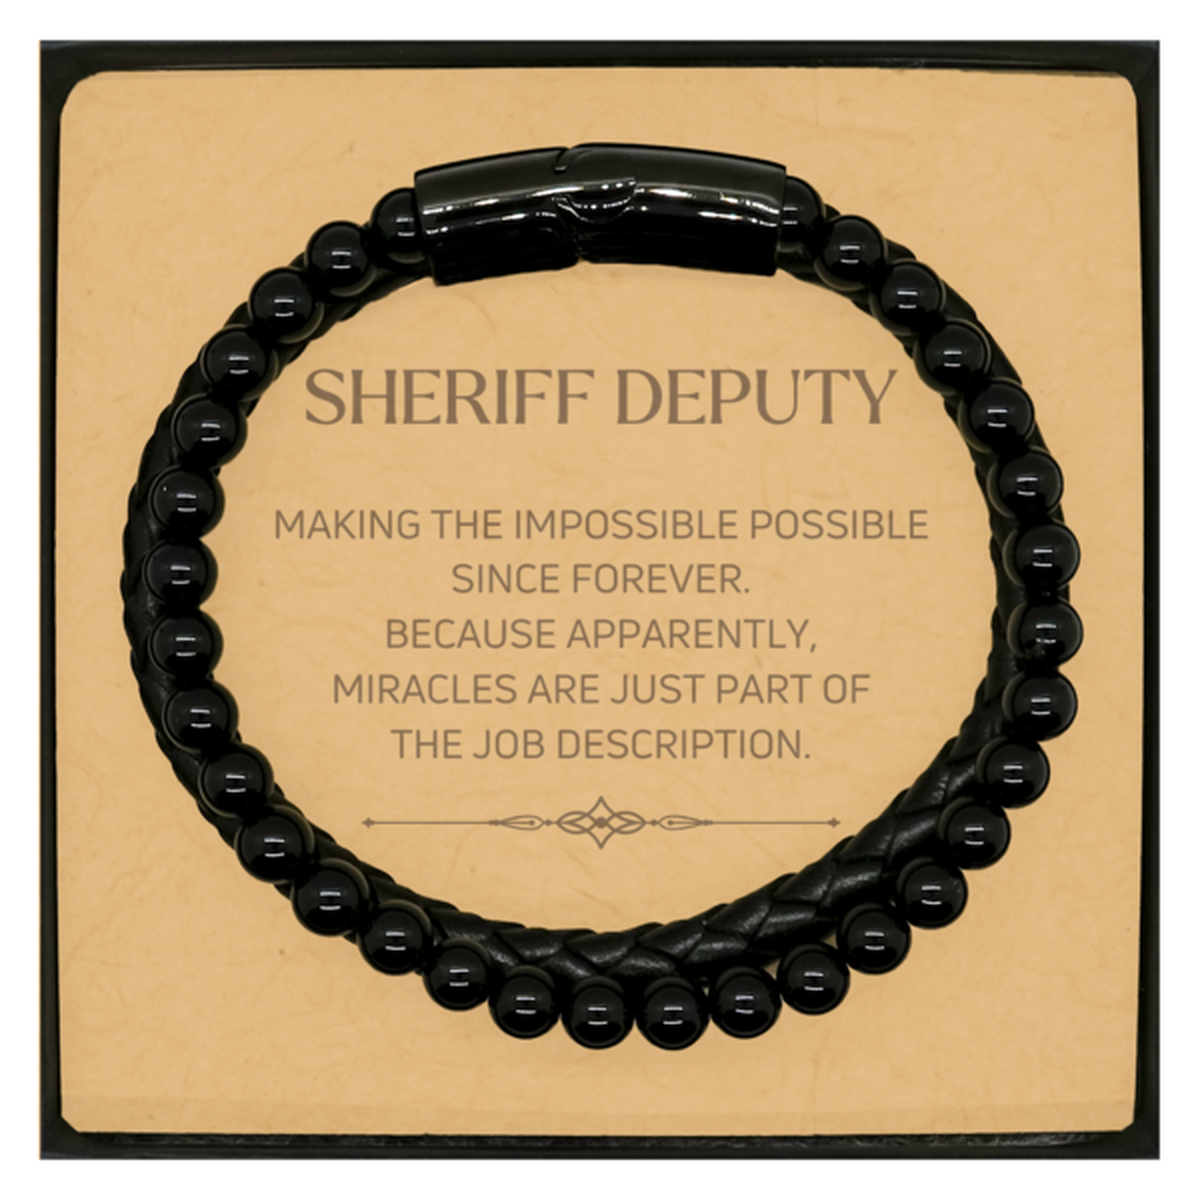 Funny Sheriff Deputy Gifts, Miracles are just part of the job description, Inspirational Birthday Christmas Stone Leather Bracelets For Sheriff Deputy, Men, Women, Coworkers, Friends, Boss